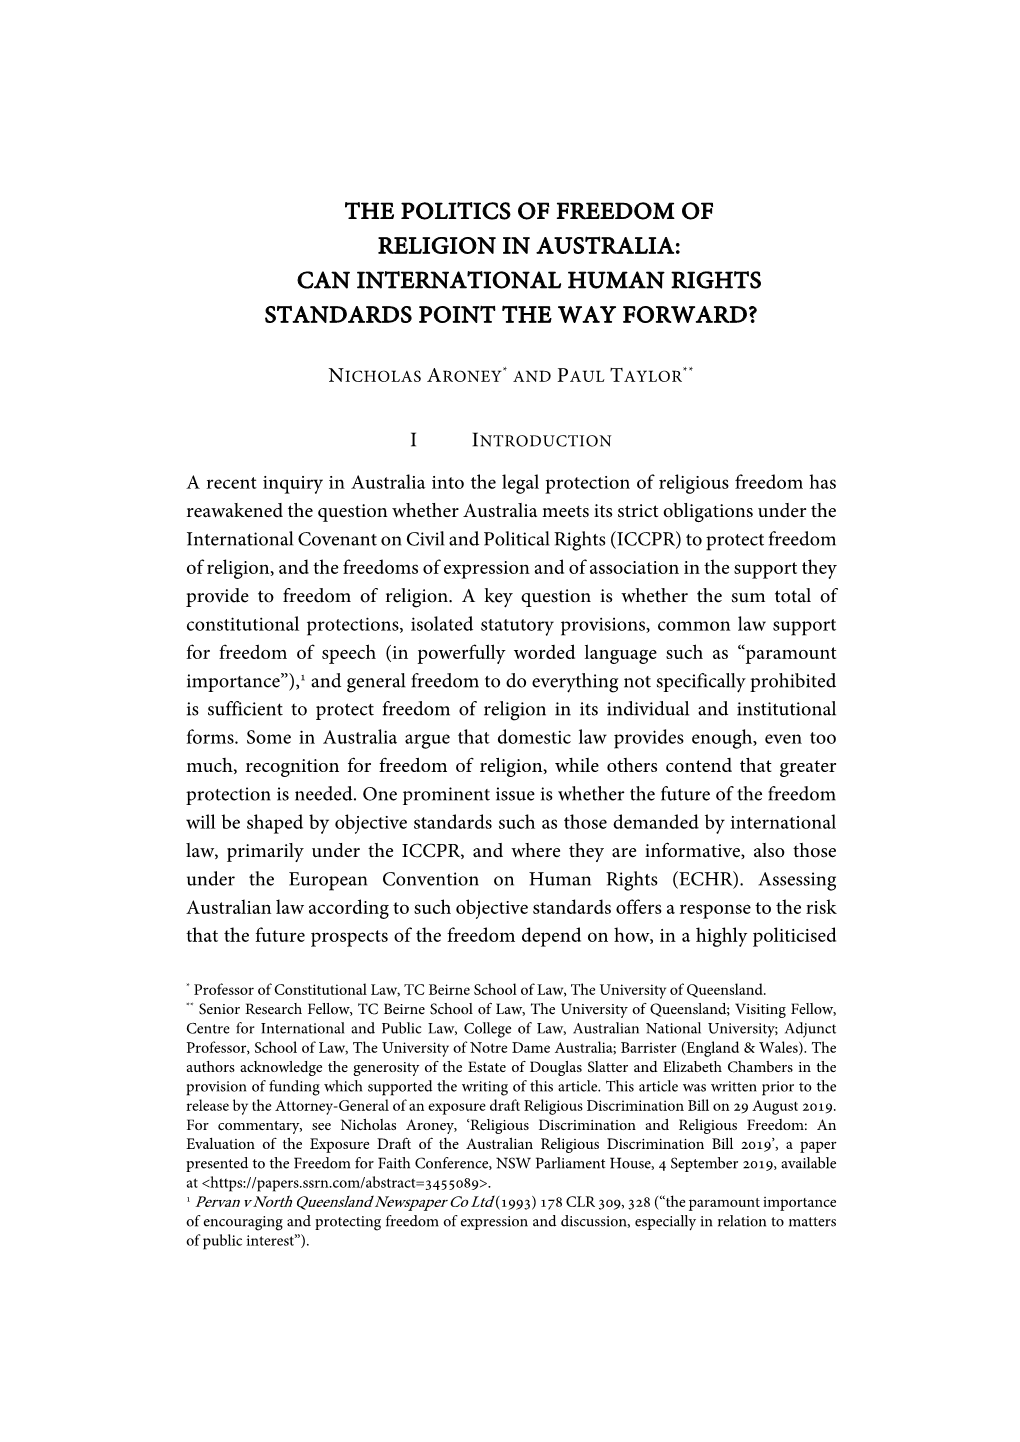 The Politics of Freedom of Religion in Australia: Can International Human Rights Standards Point the Way Forward?